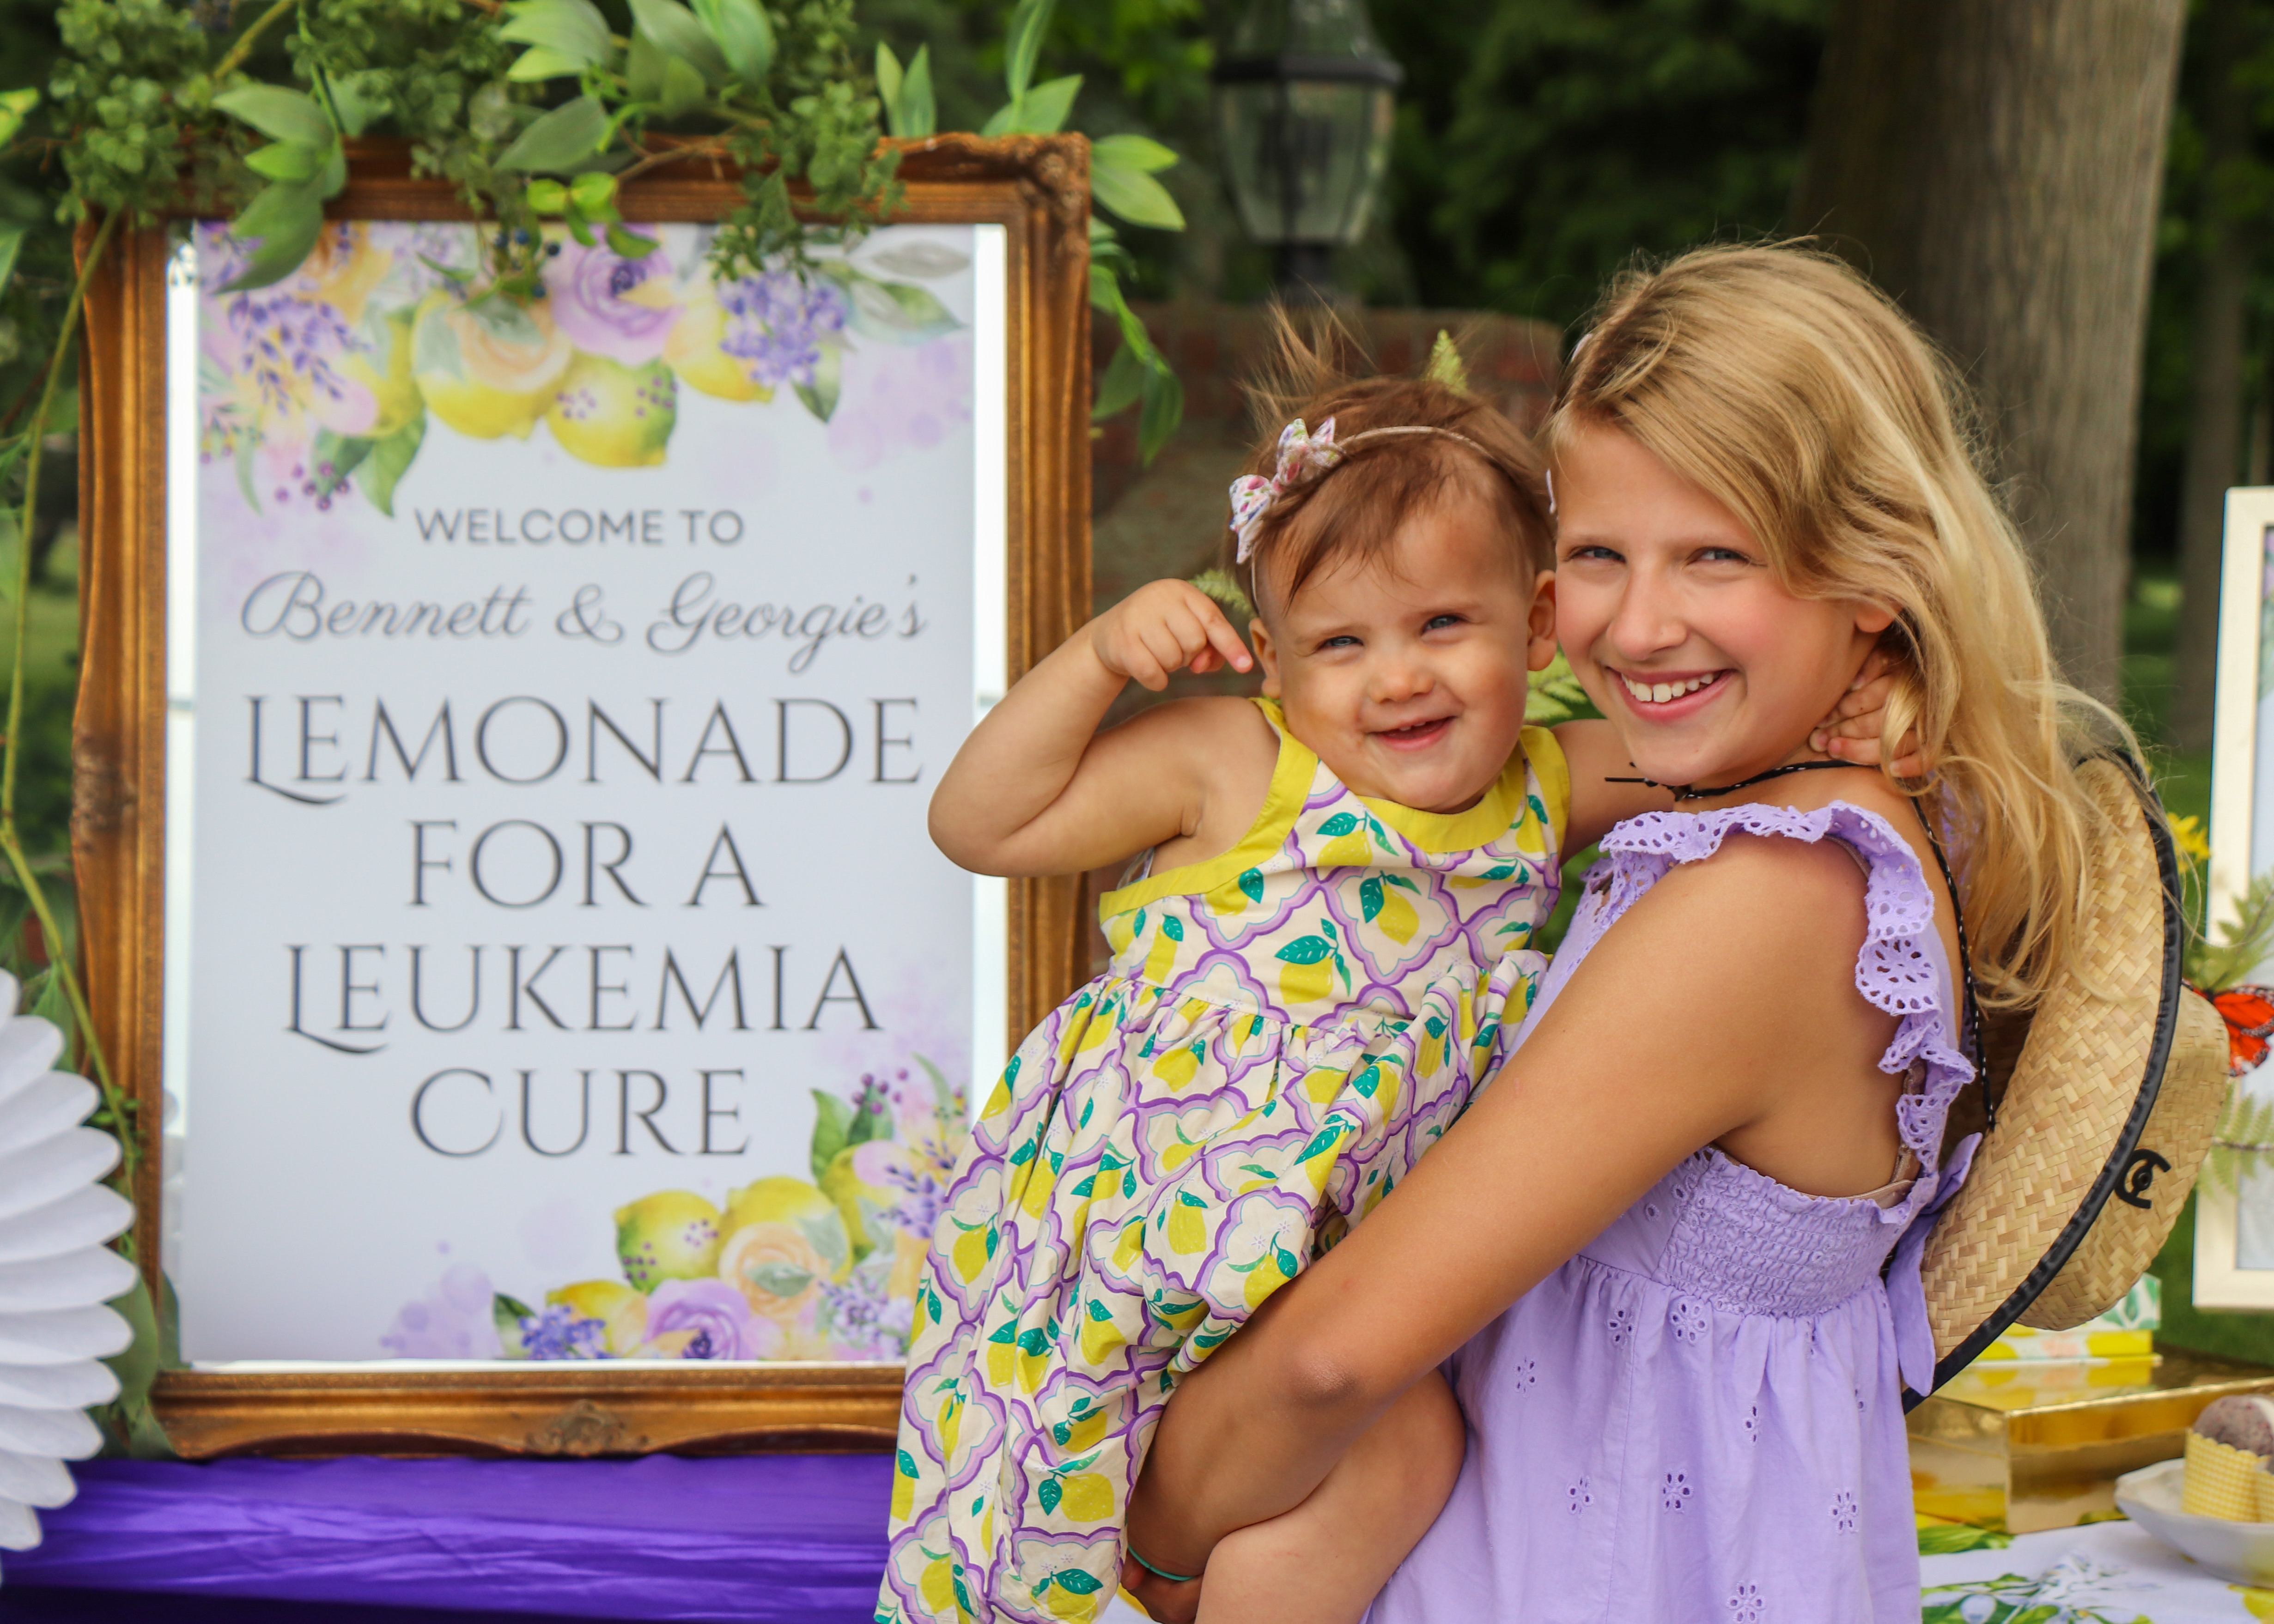 Blond girl in purple dress holding younger girl by lemonade stand sign.